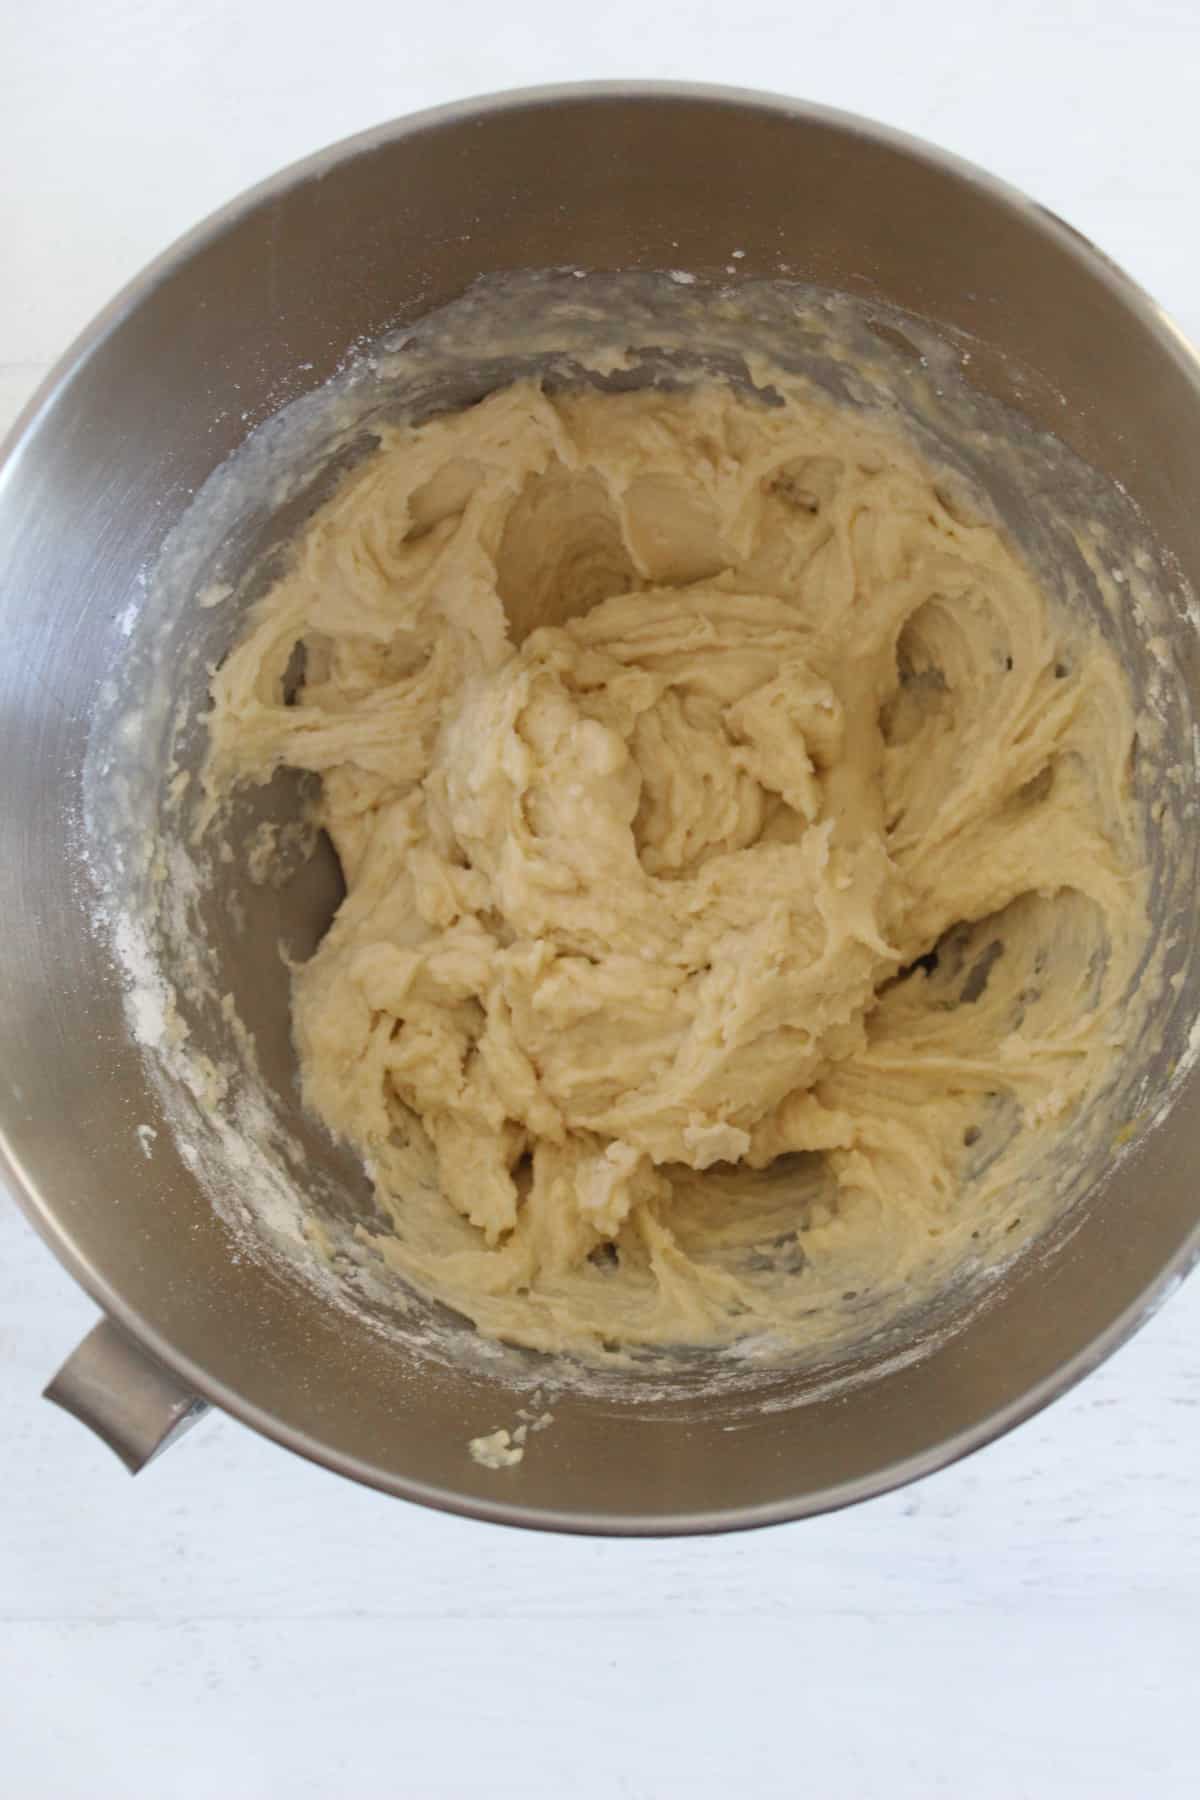 mixing bread batter in a bowl